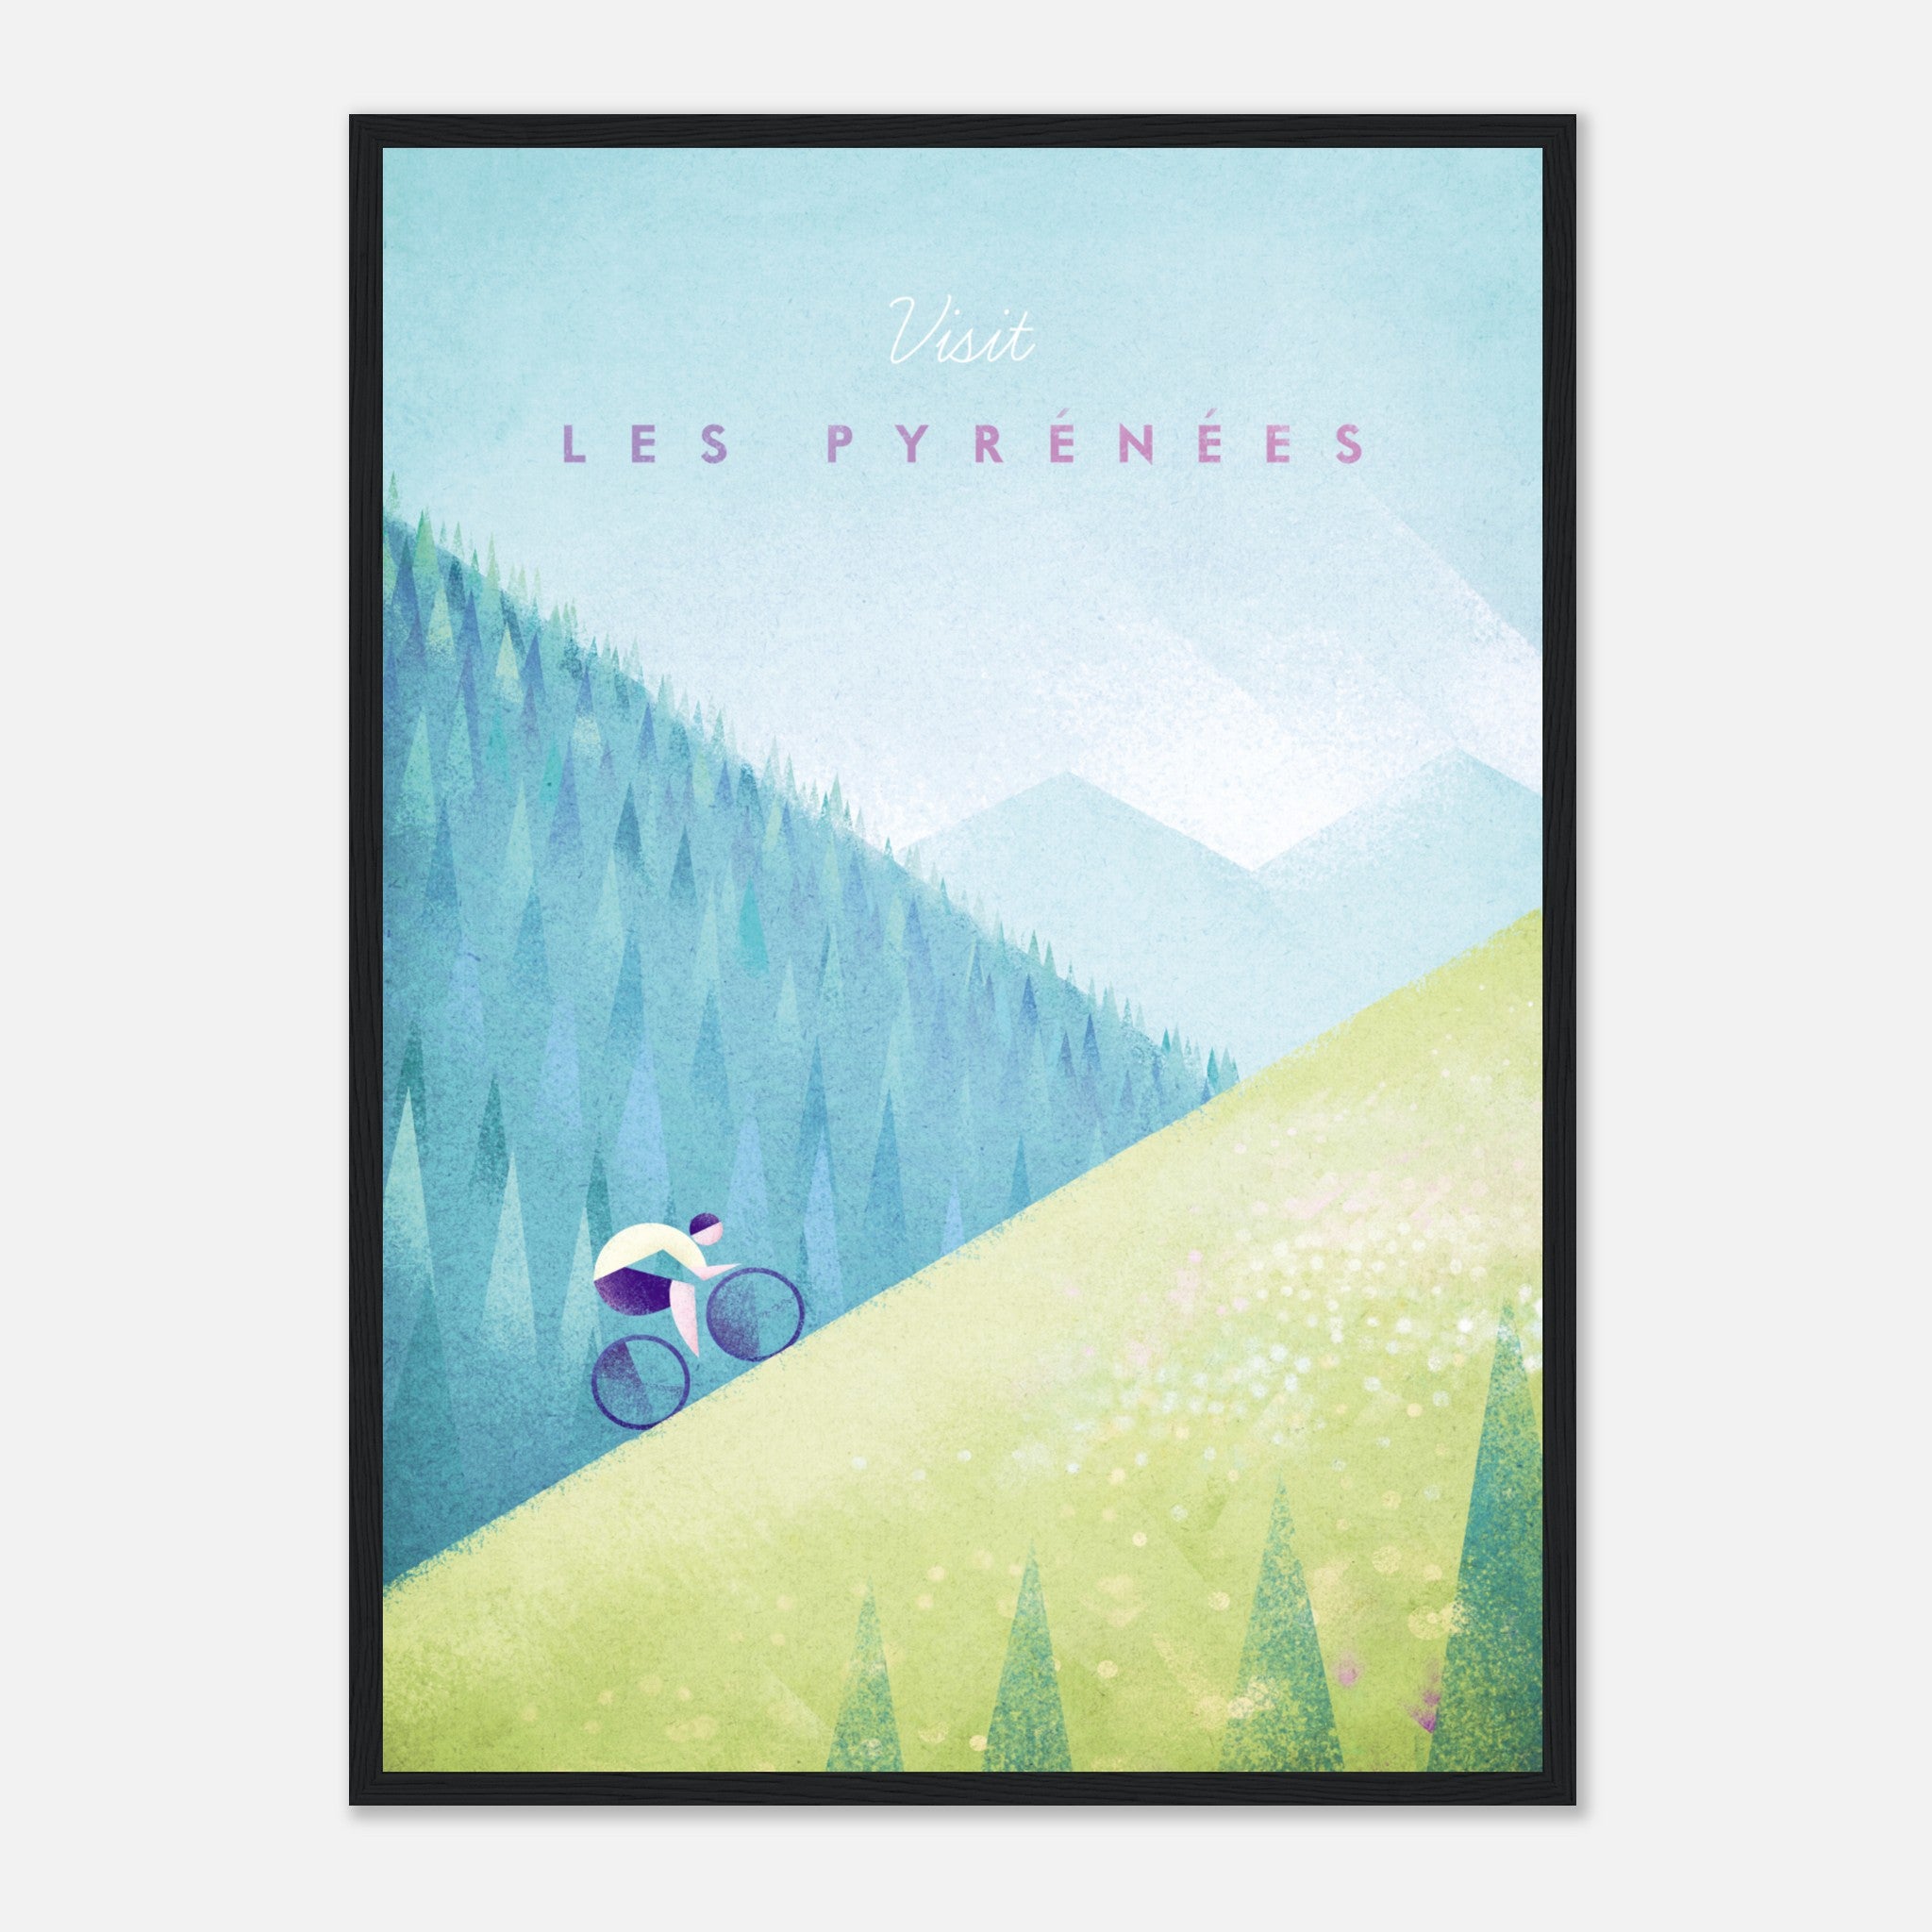 Les Pyrenees Poster